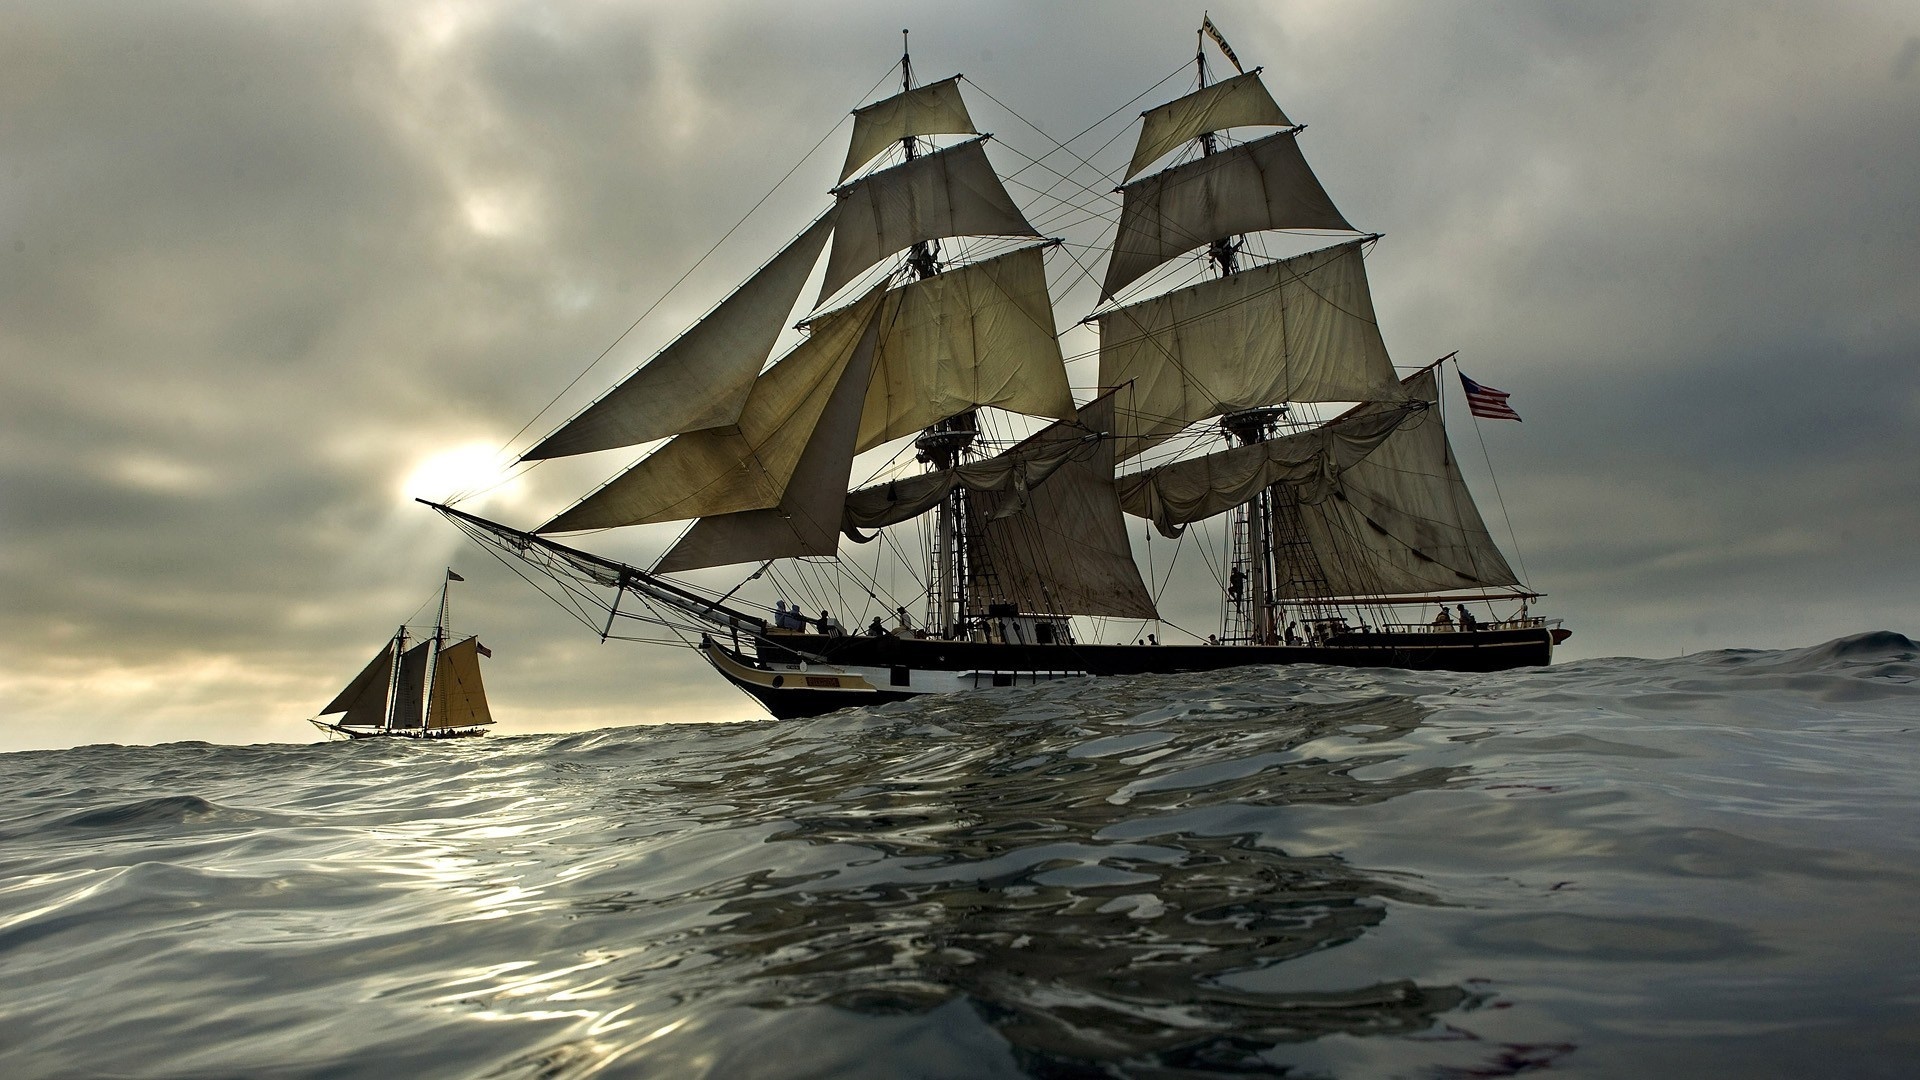 Windjammer: A tall ship, A large, traditionally-rigged sailing vessel. 1920x1080 Full HD Background.